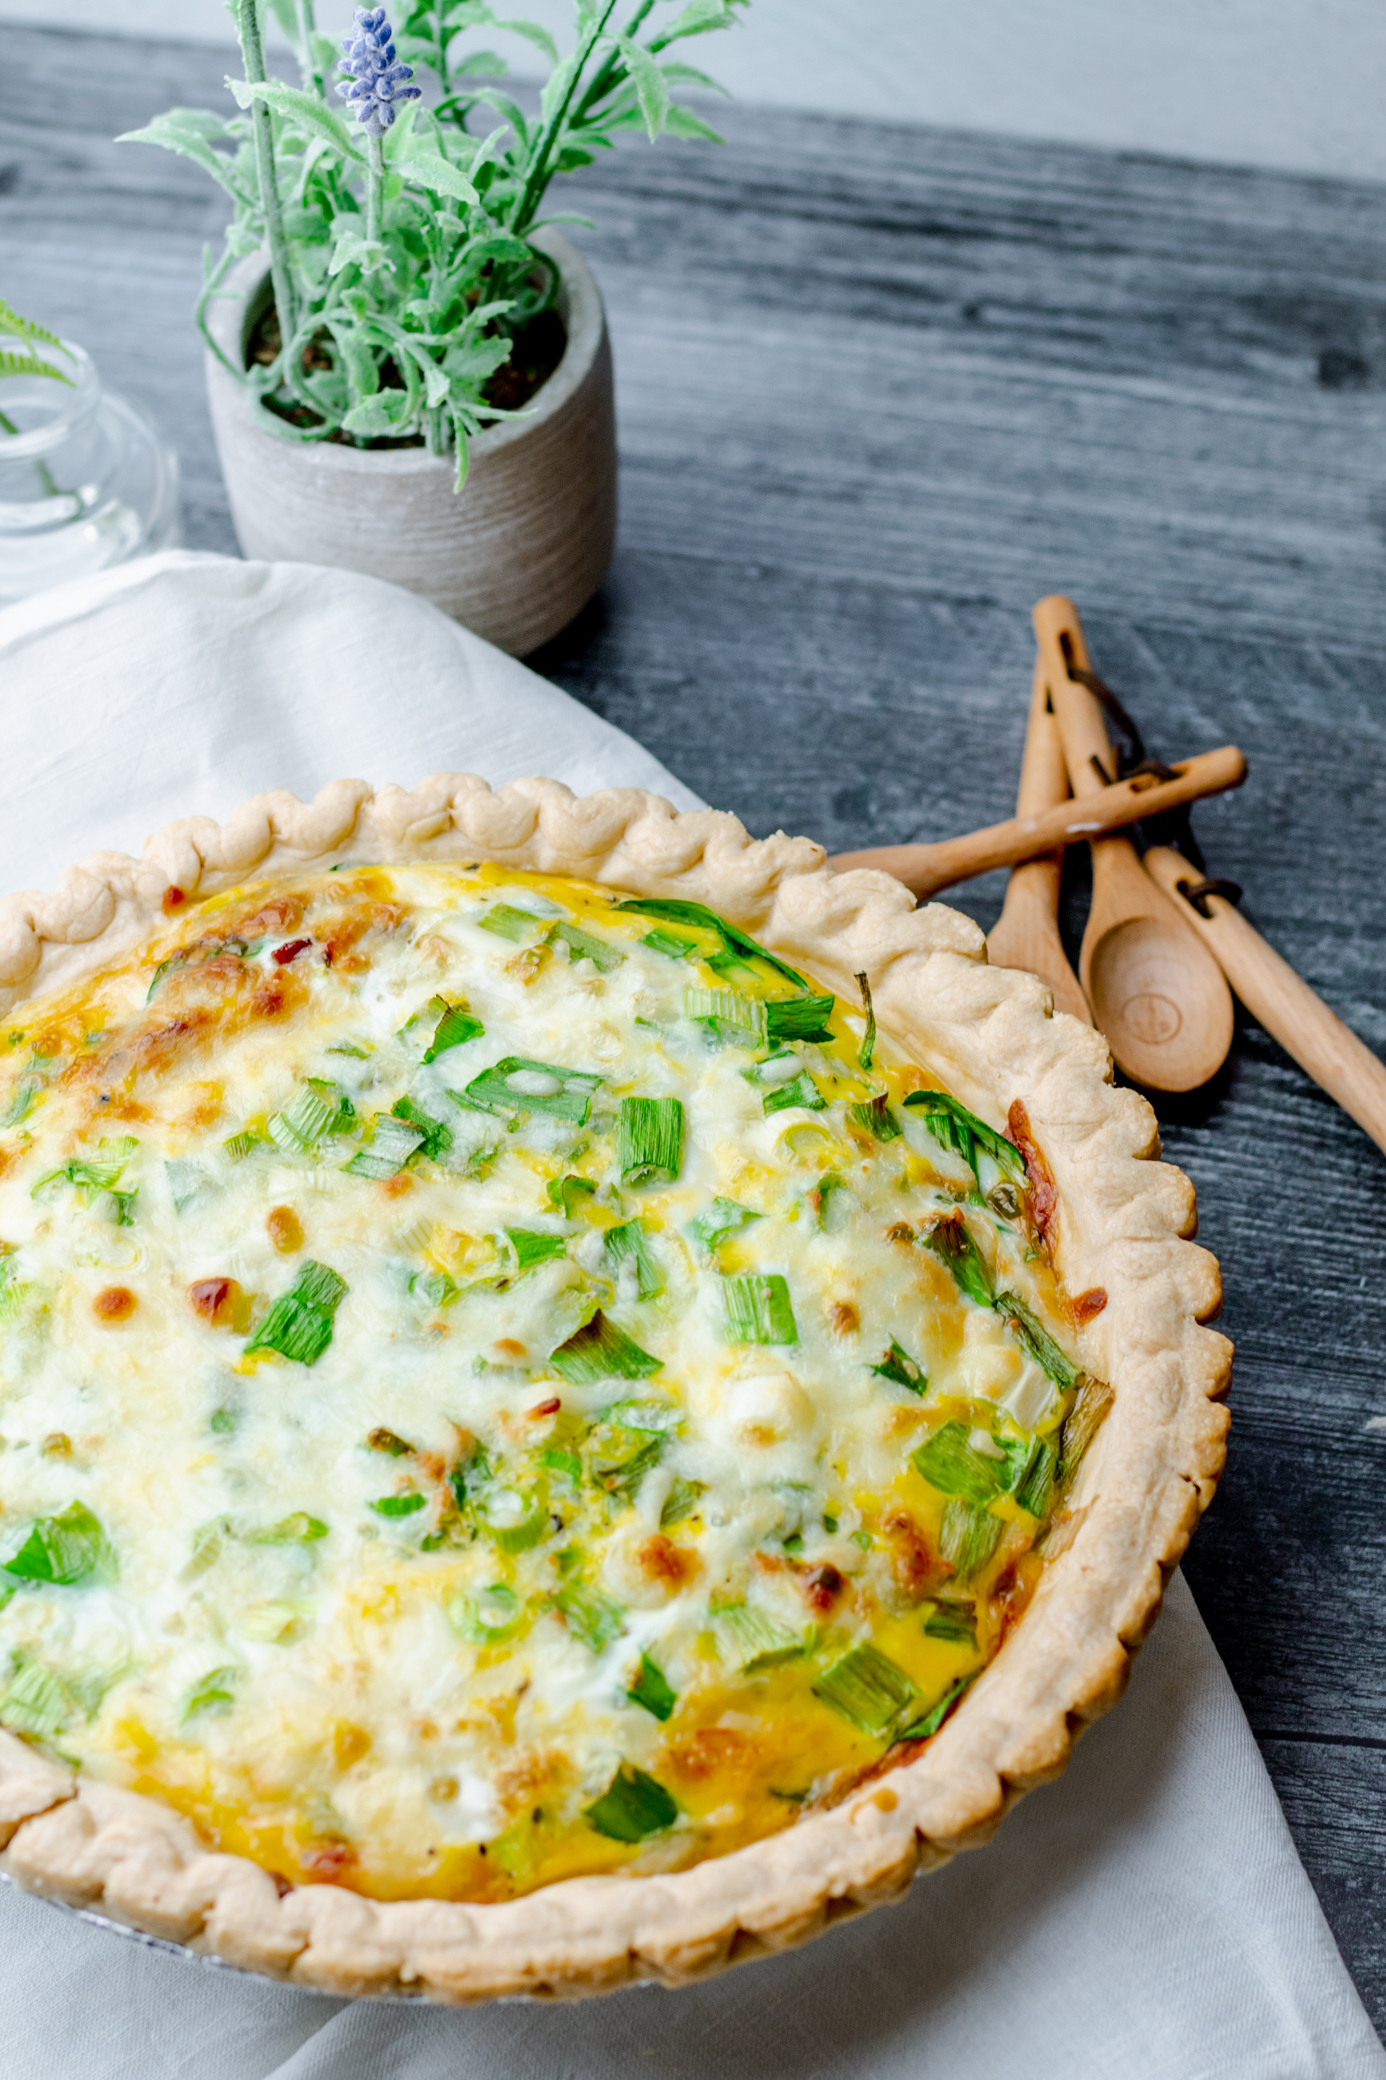 bacon and spinach quiche on a white cloth with a lavender plant and set of wooden measuring spoons